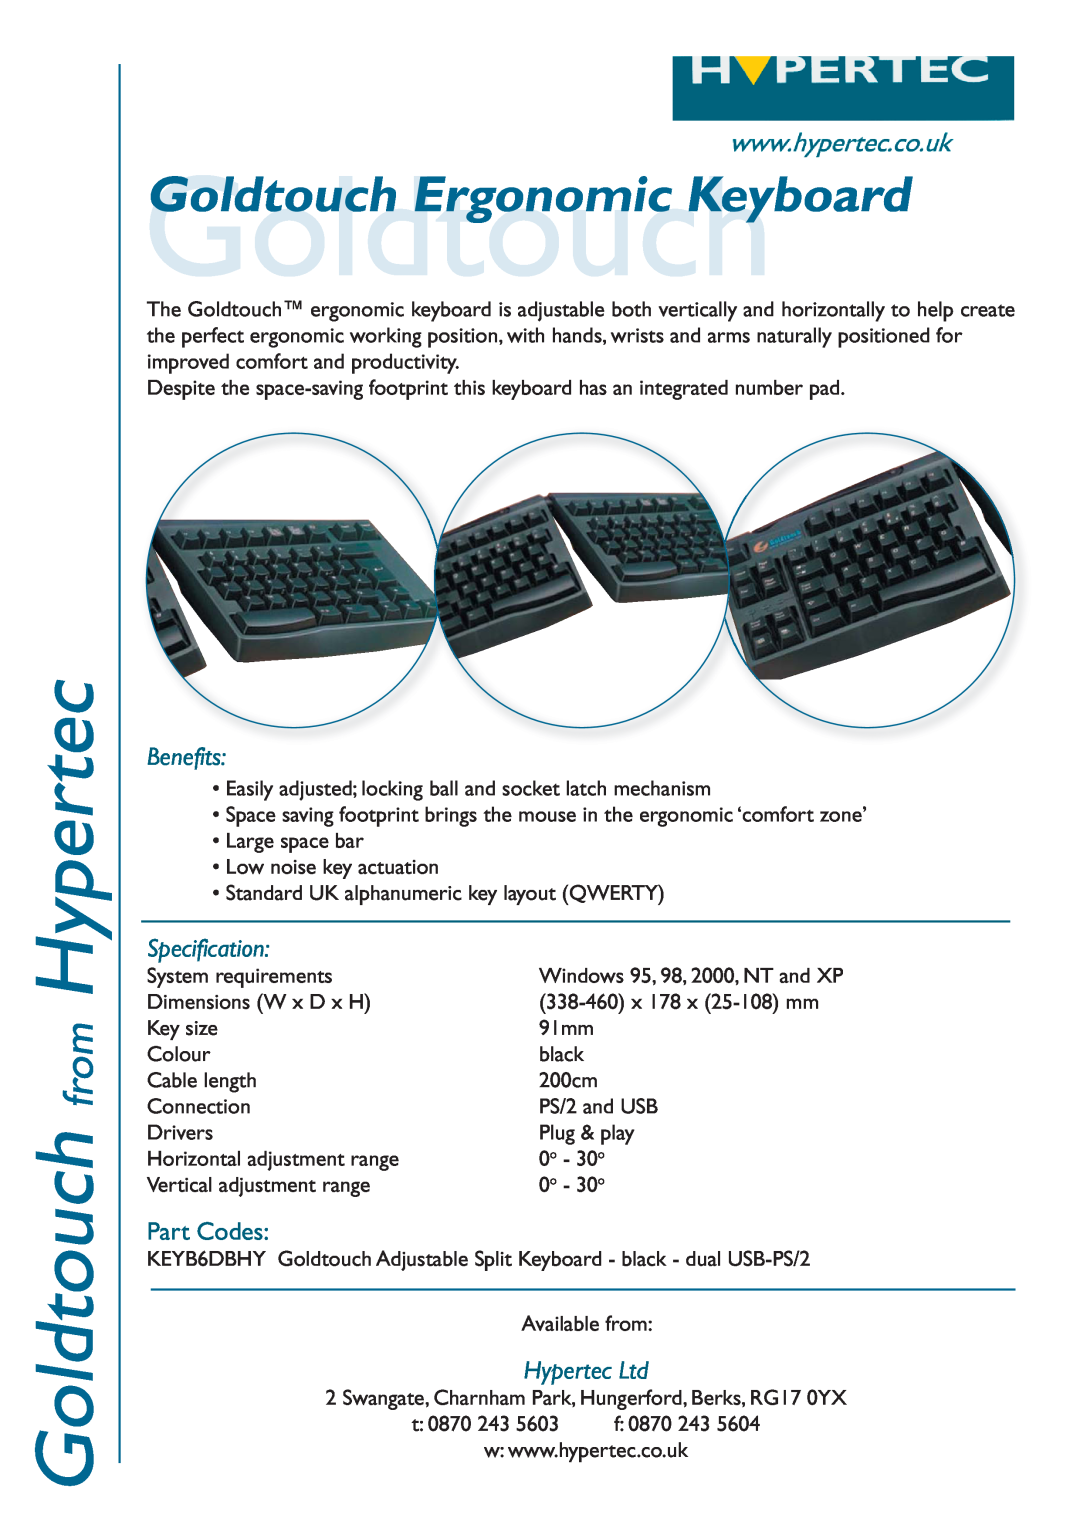 Hypertec KEYB6DBHY specifications Goldtouch from Hypertec, Benefits, Specification, Part Codes 